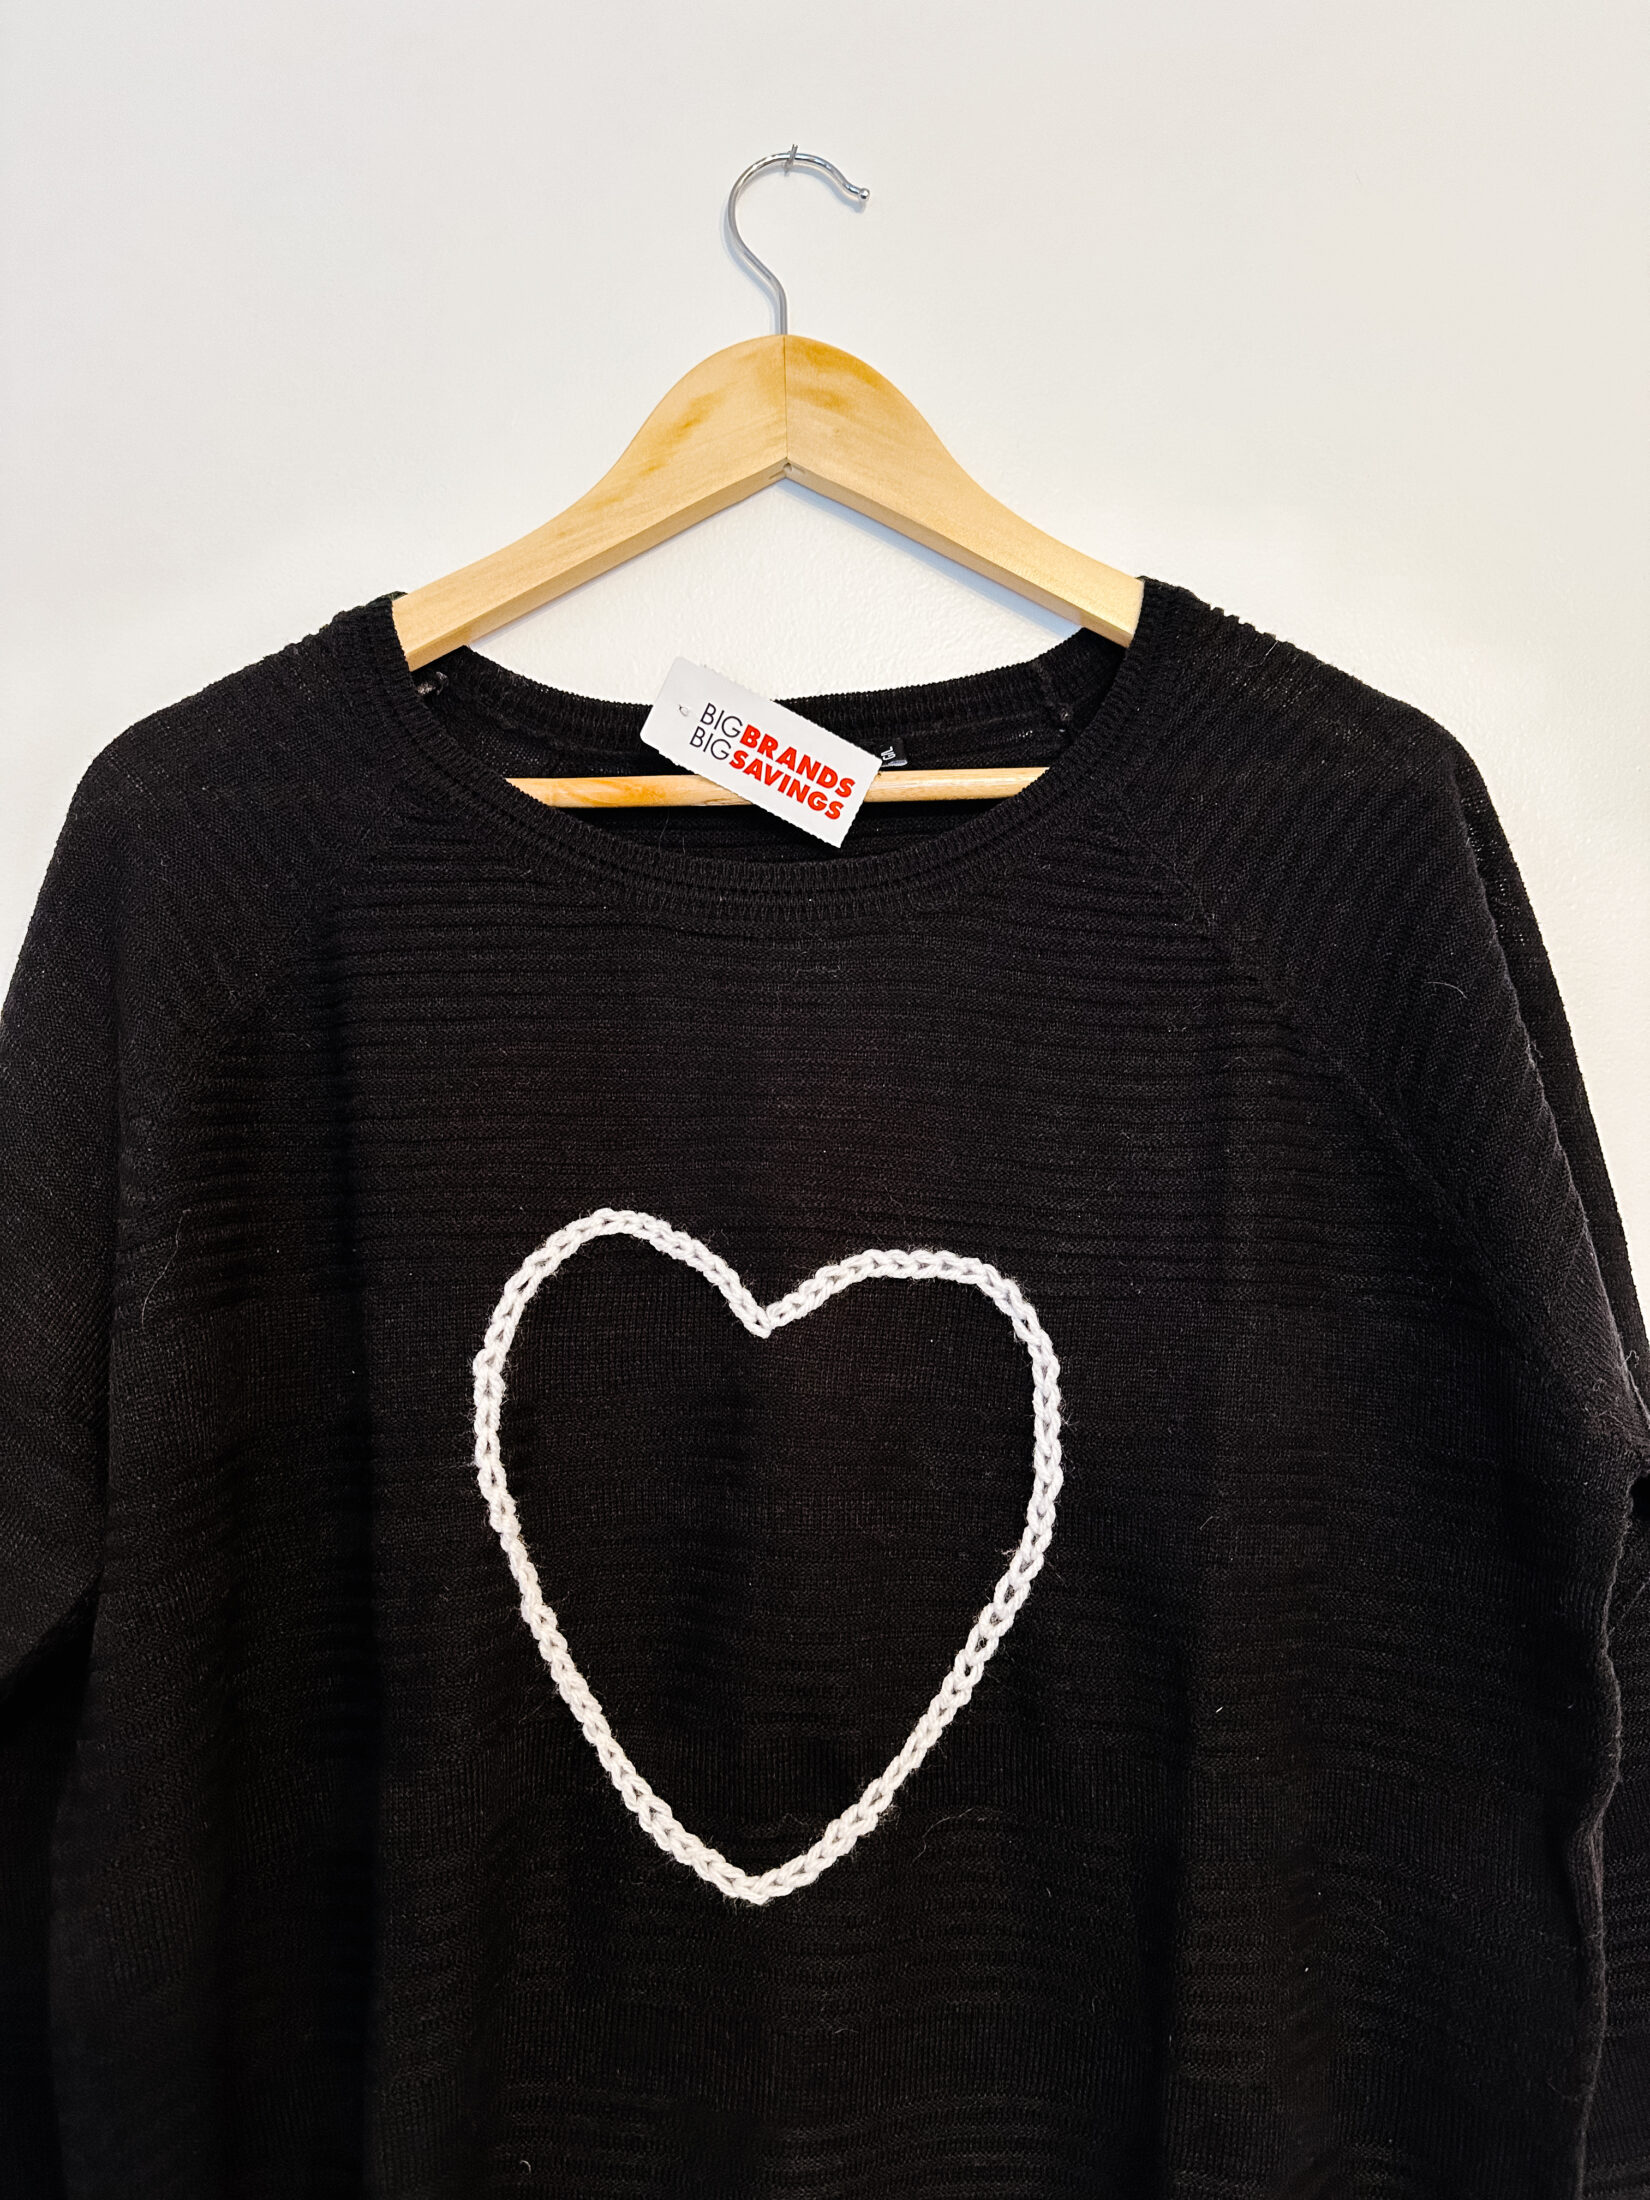 Heart Embroidered Sweater | Sew Bright Creations | Heart Crafts for Adults